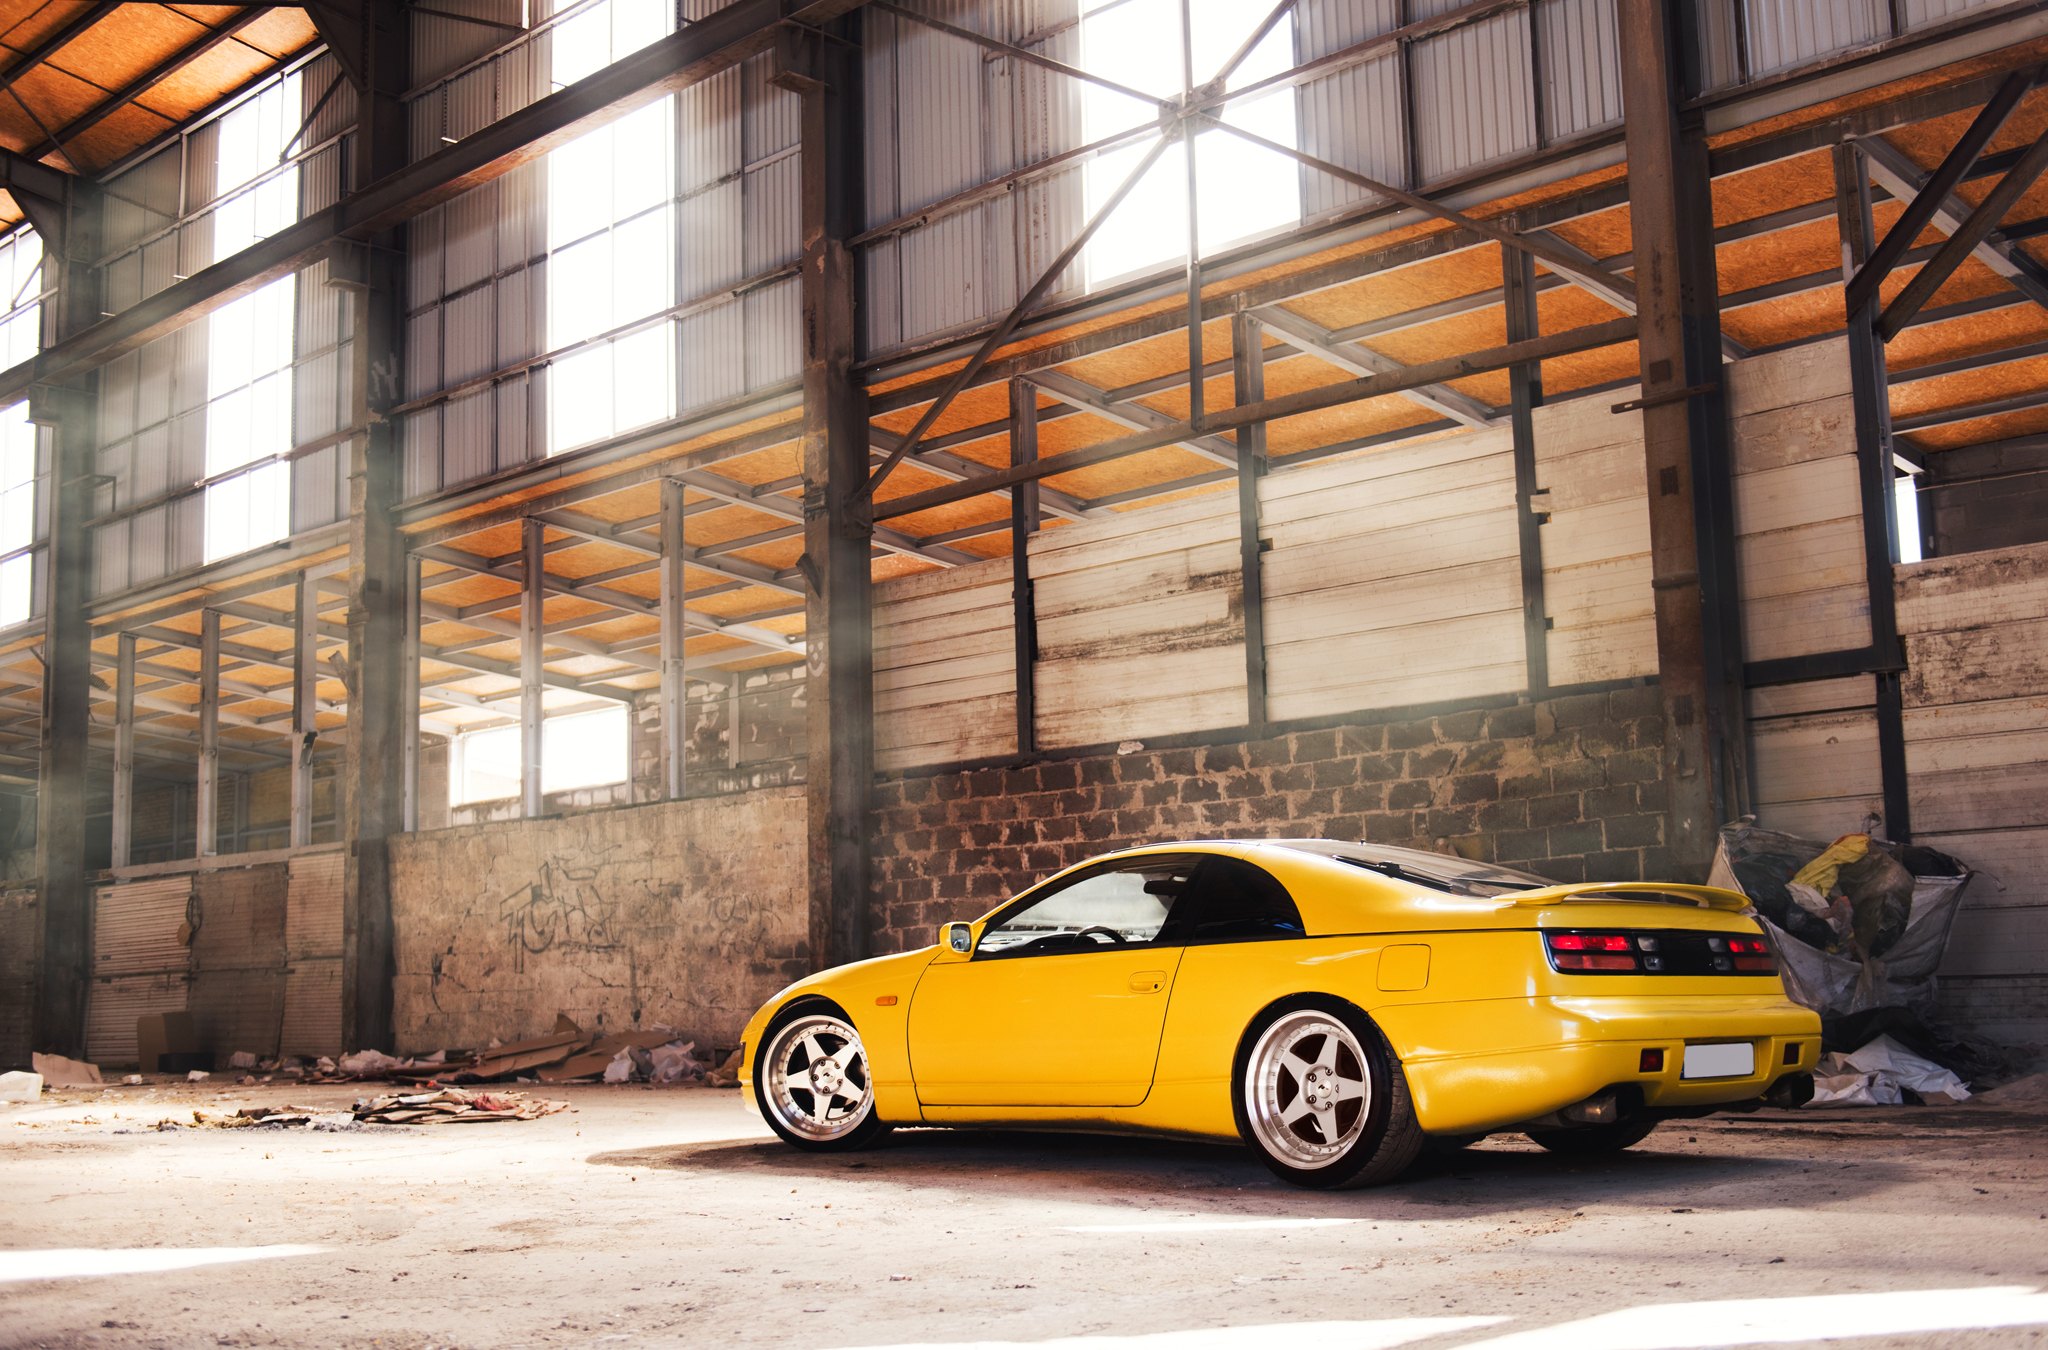 Aftermarket Rear Diffuser on Yellow Nissan 300ZX - Photo by JR Wheels